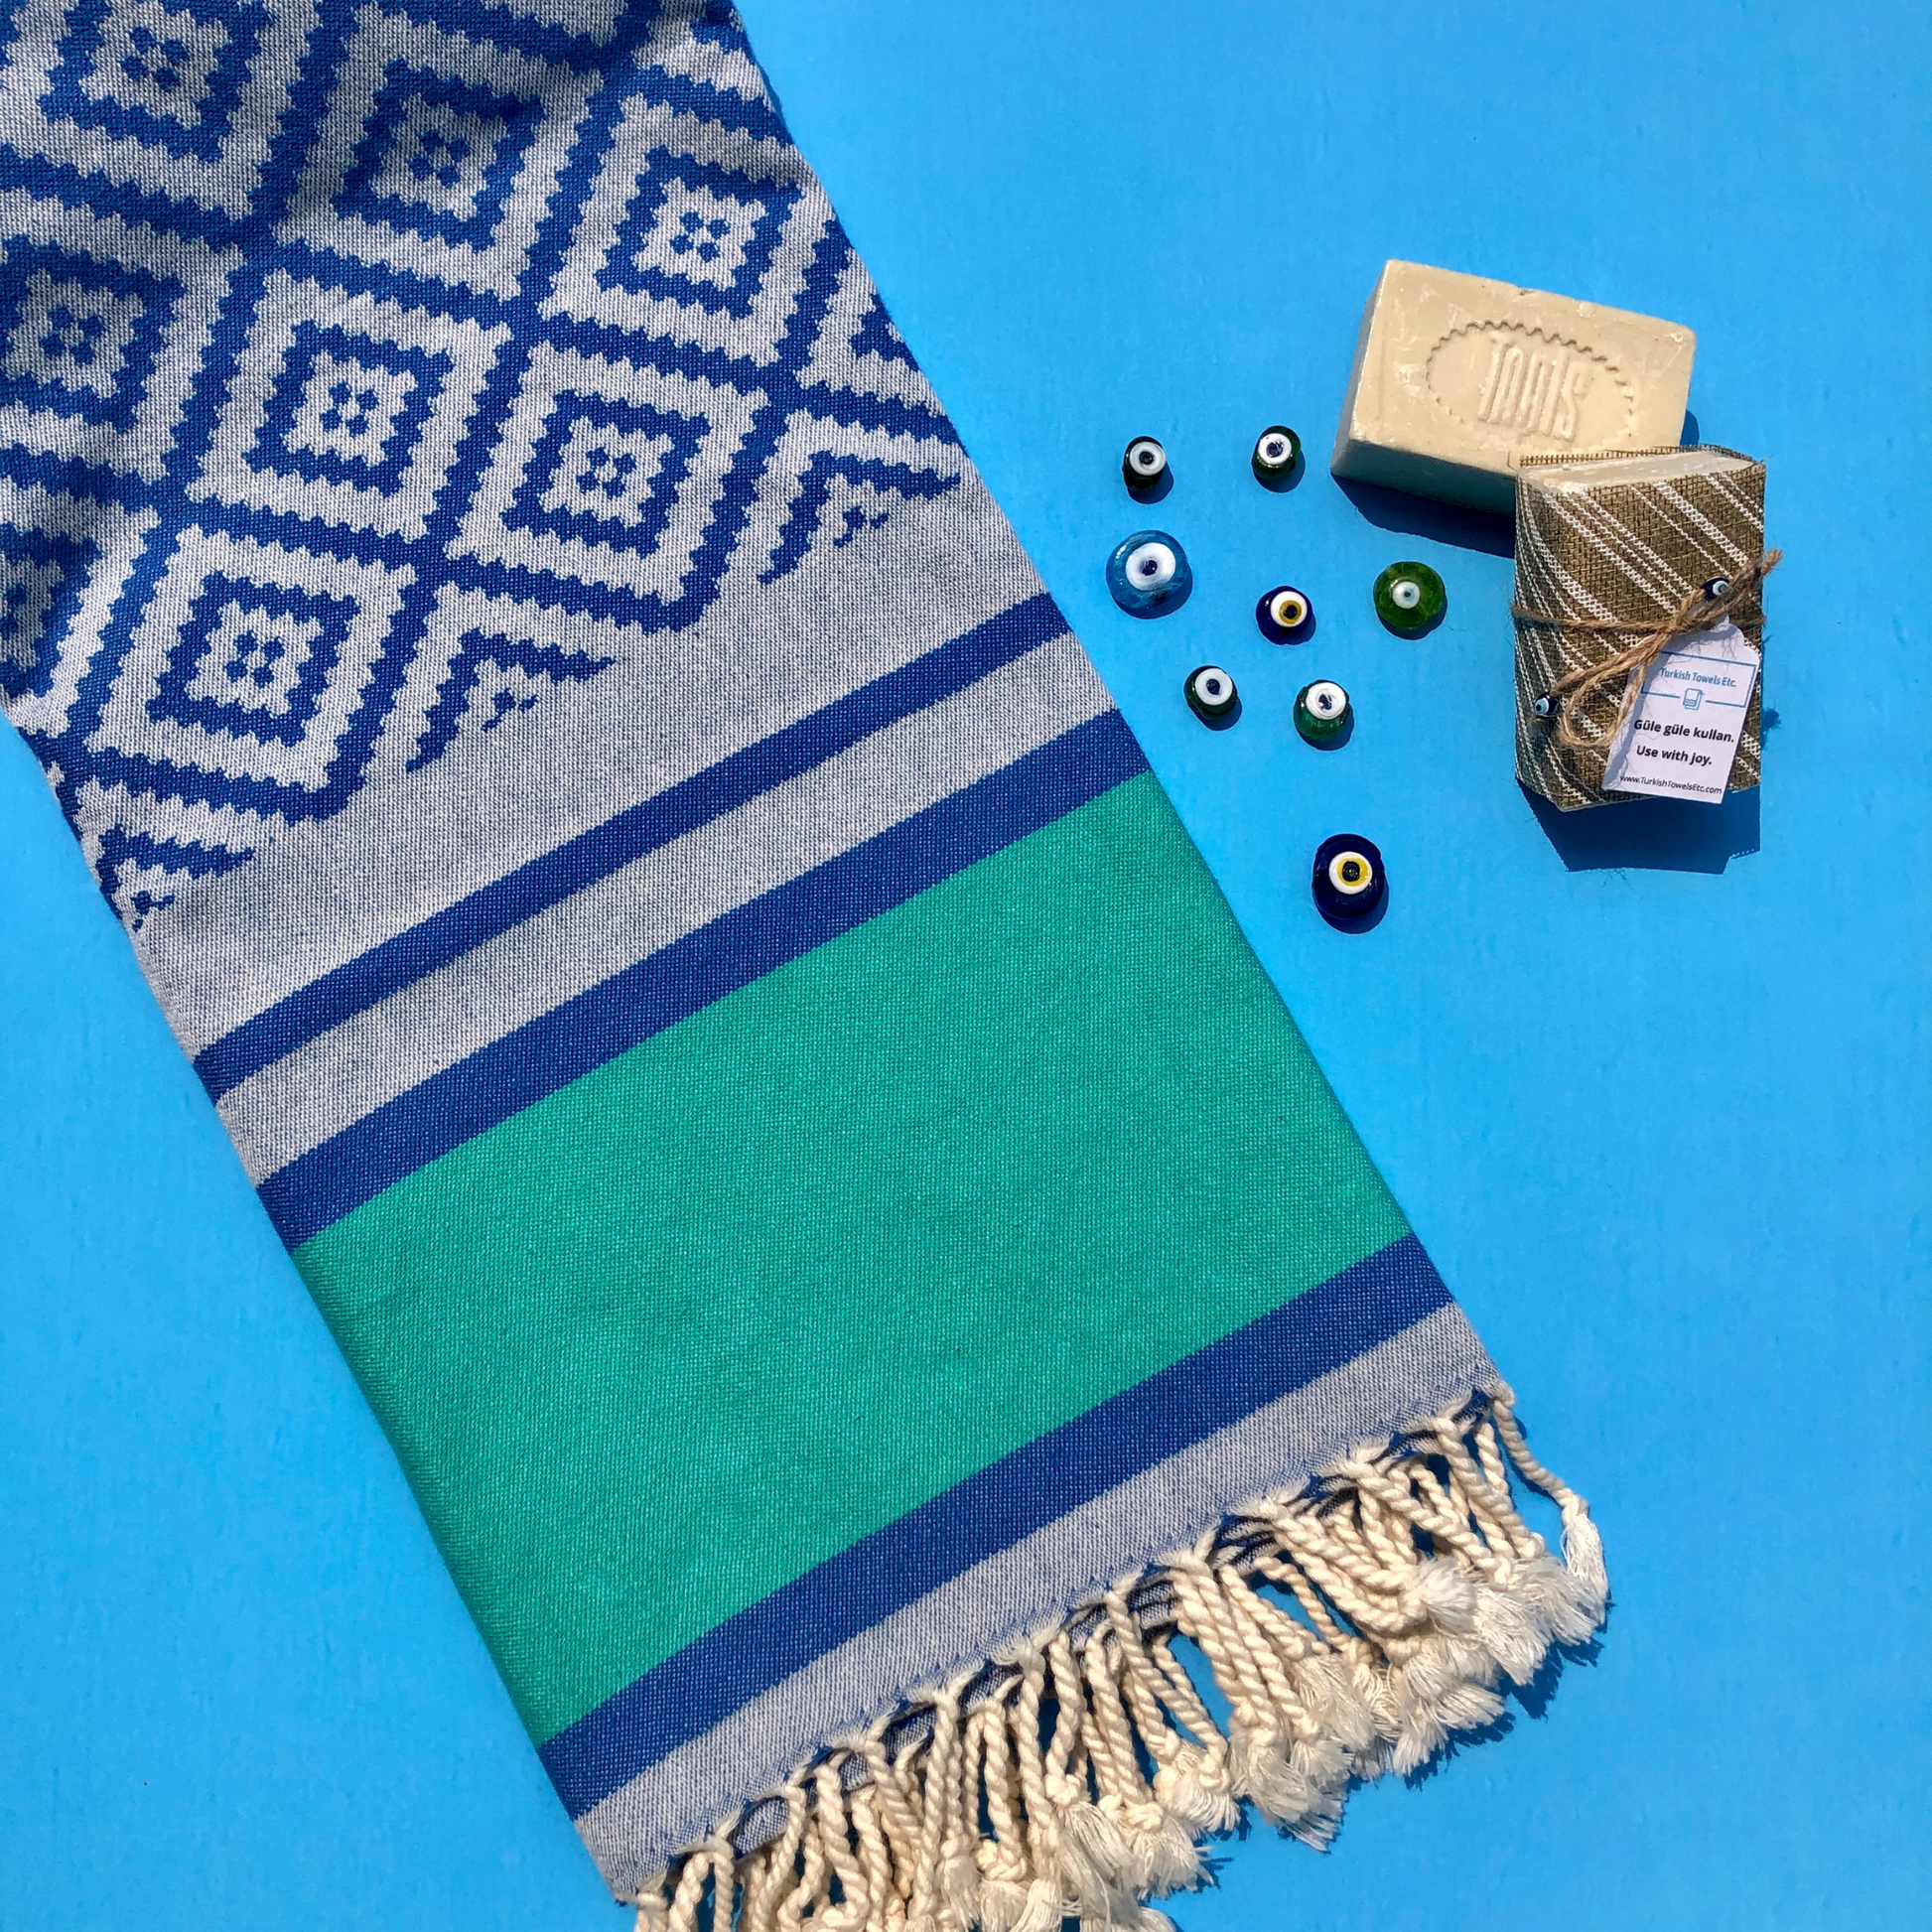 DIVAN Turkish Towel with olive oil soap bars and Turkish evil eye beads